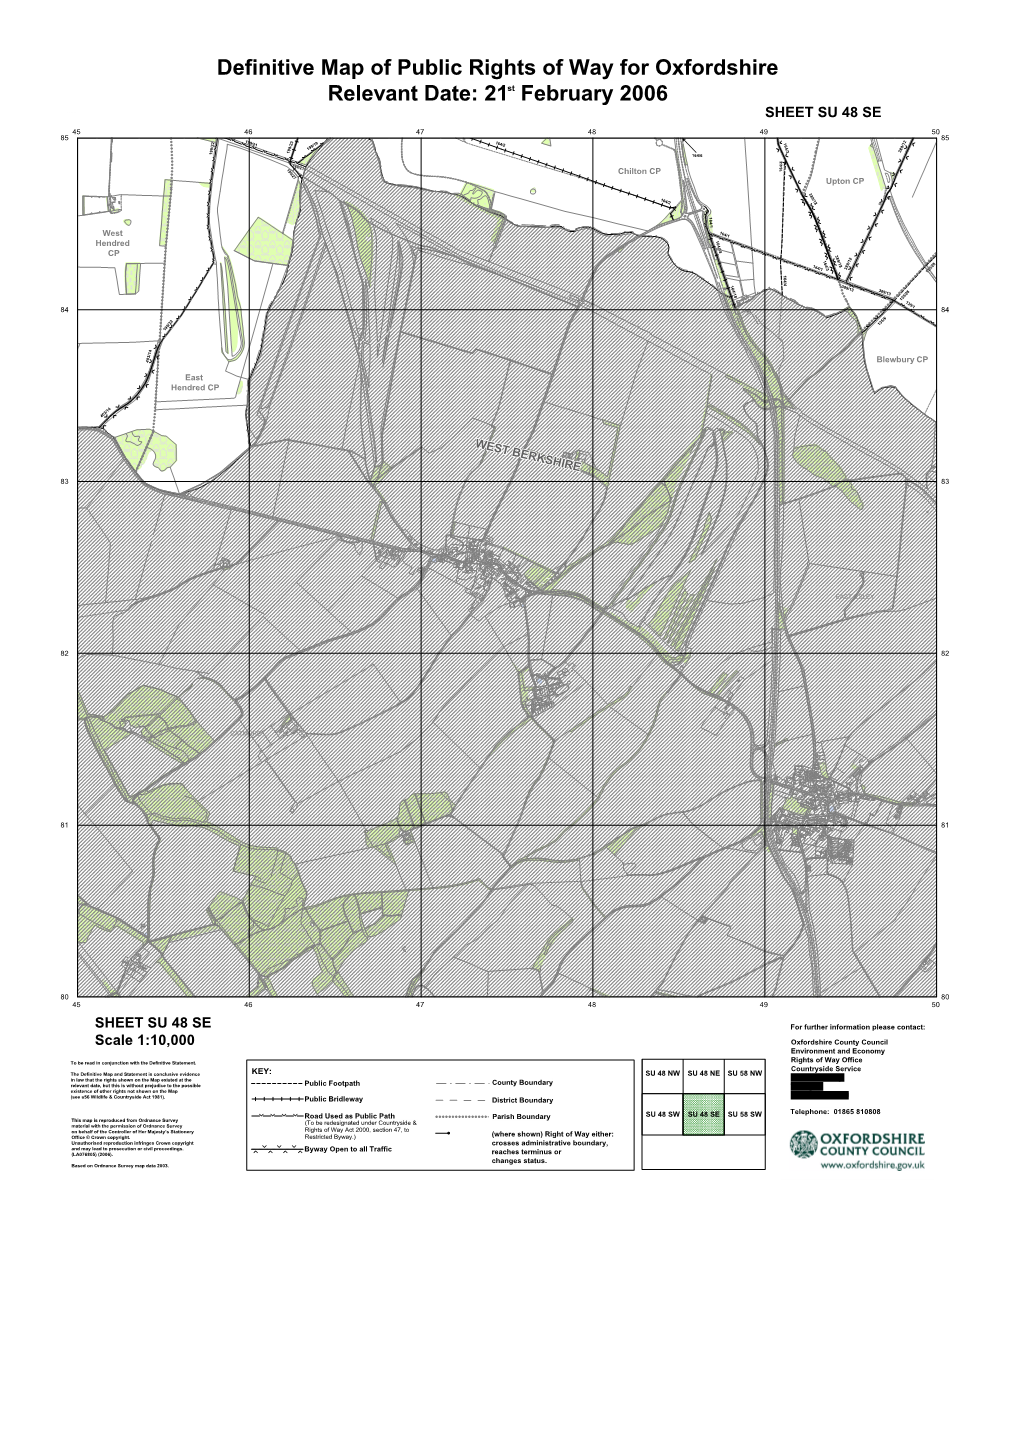 Definitive Map of Public Rights of Way for Oxfordshire Relevant Date: 21St February 2006 Colour SHEET SU 48 SE